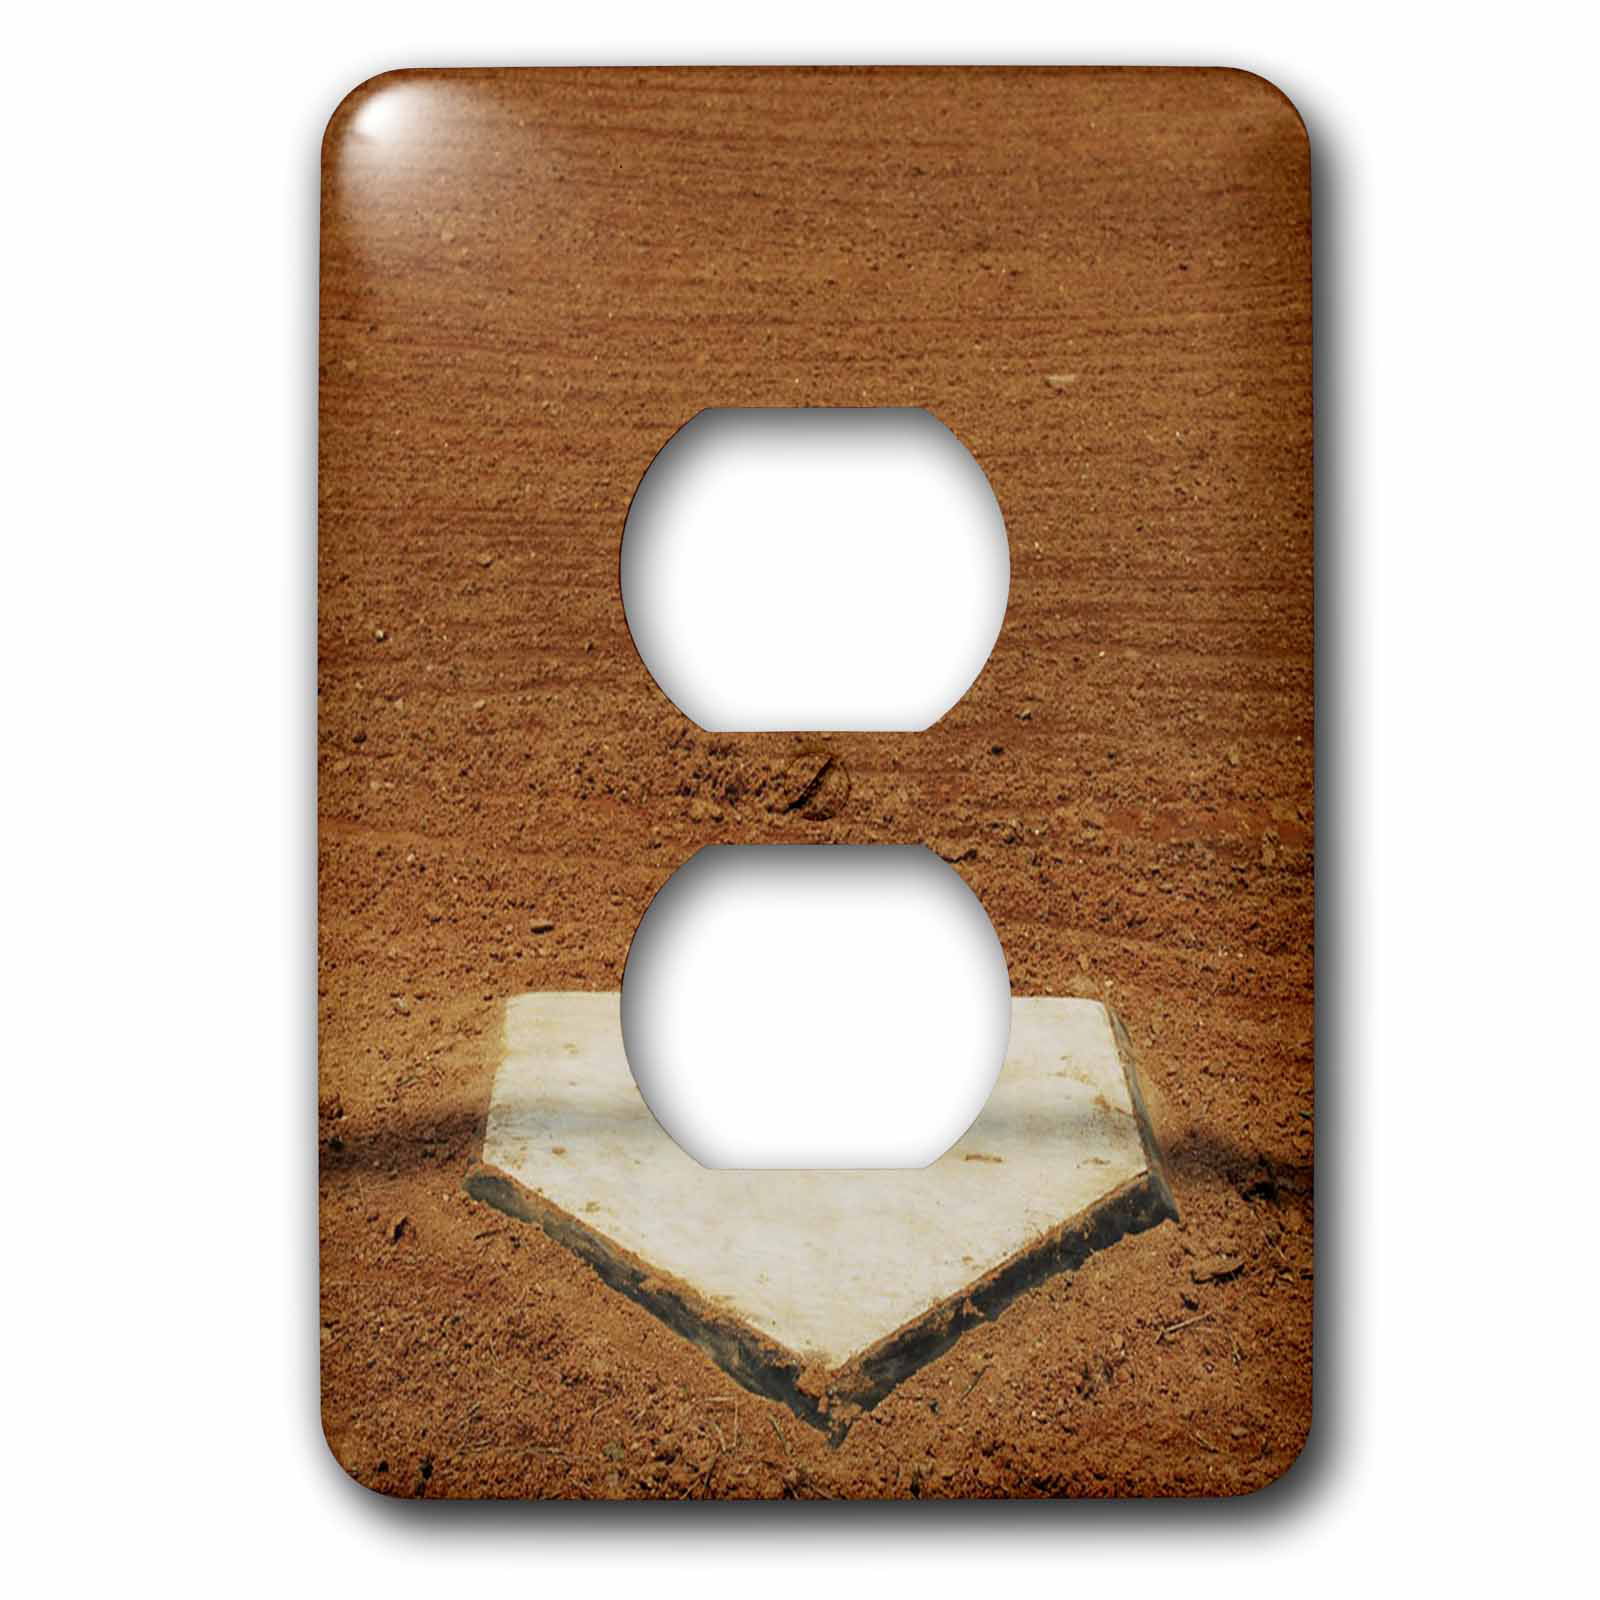 3dRose lsp_50211_6 Home Plate In Baseball Outlet Cover 